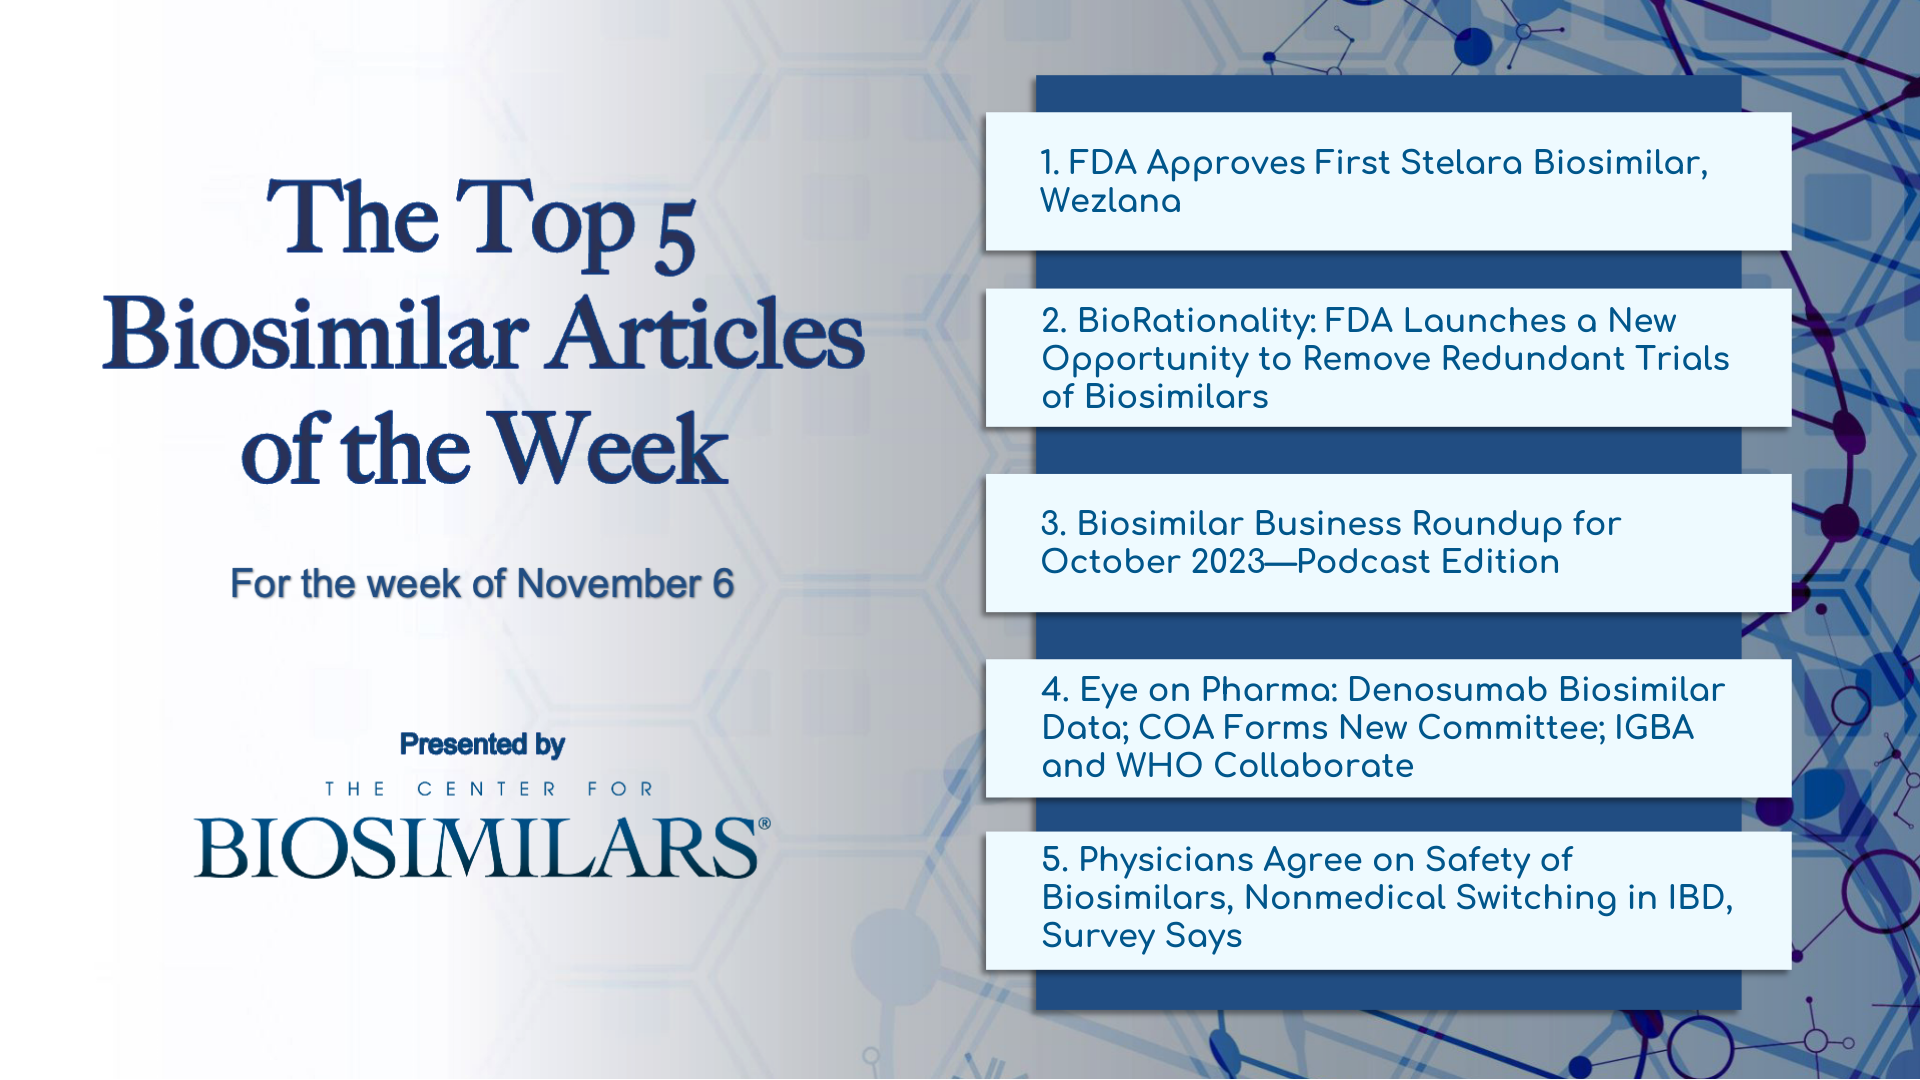 Here are the top 5 biosimilar articles for the week of November 6, 2023.